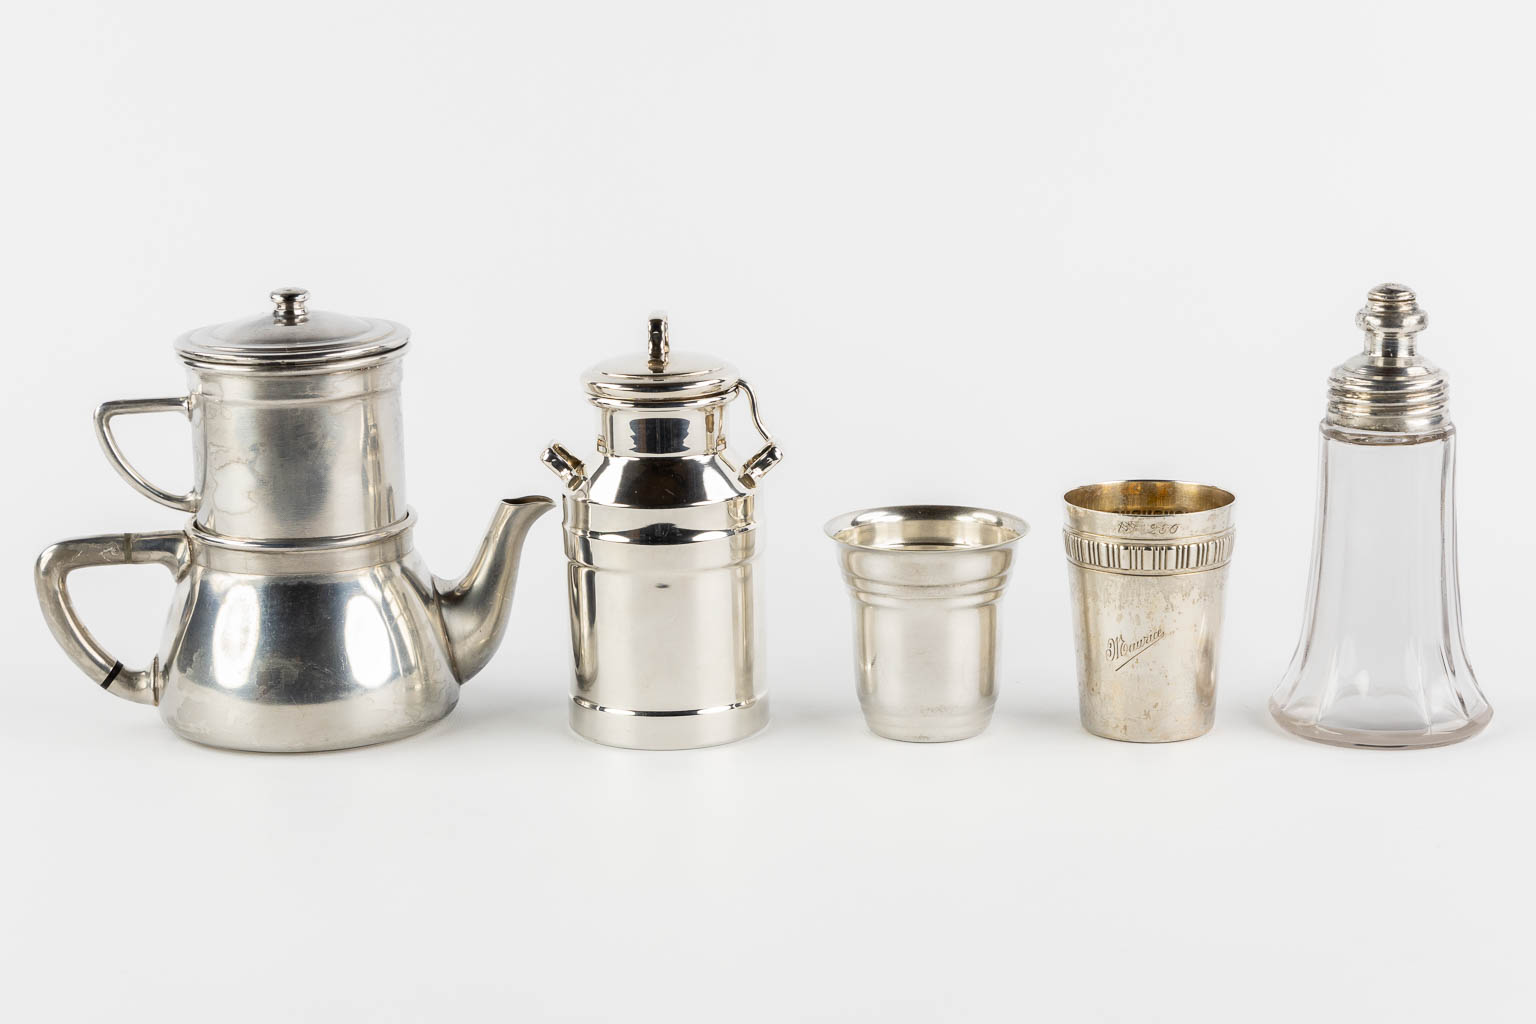 A large collection of silver and silver-plated objects, table accessories and serving ware. (L:16 x W:37 x H:12,5 cm)